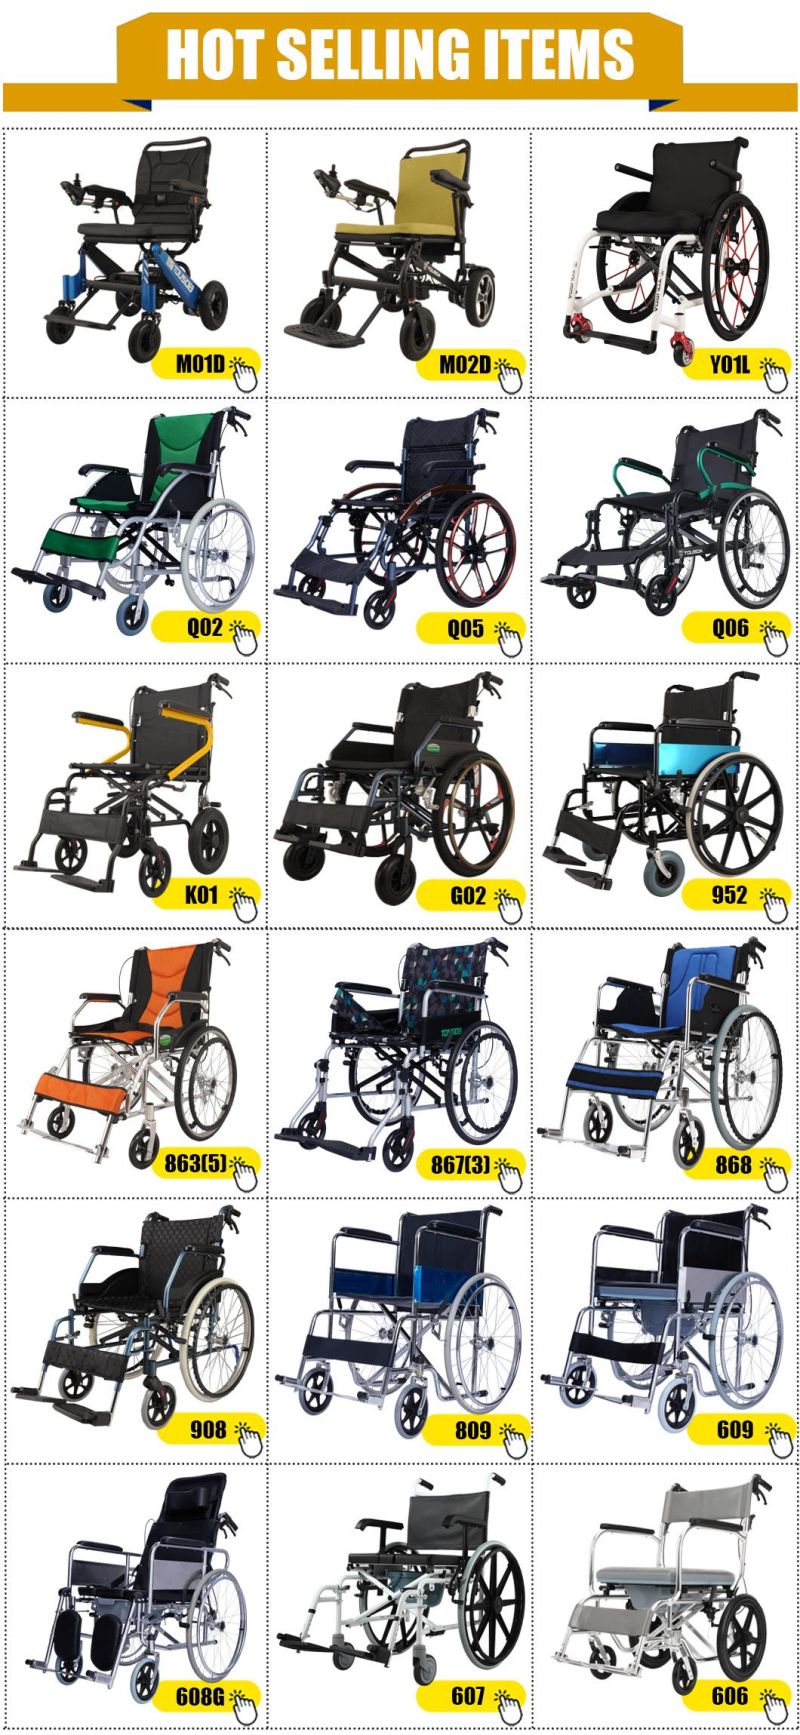 China Factory High Strength Heavy Duty Stainless Chromed Steel Transport Wheelchair